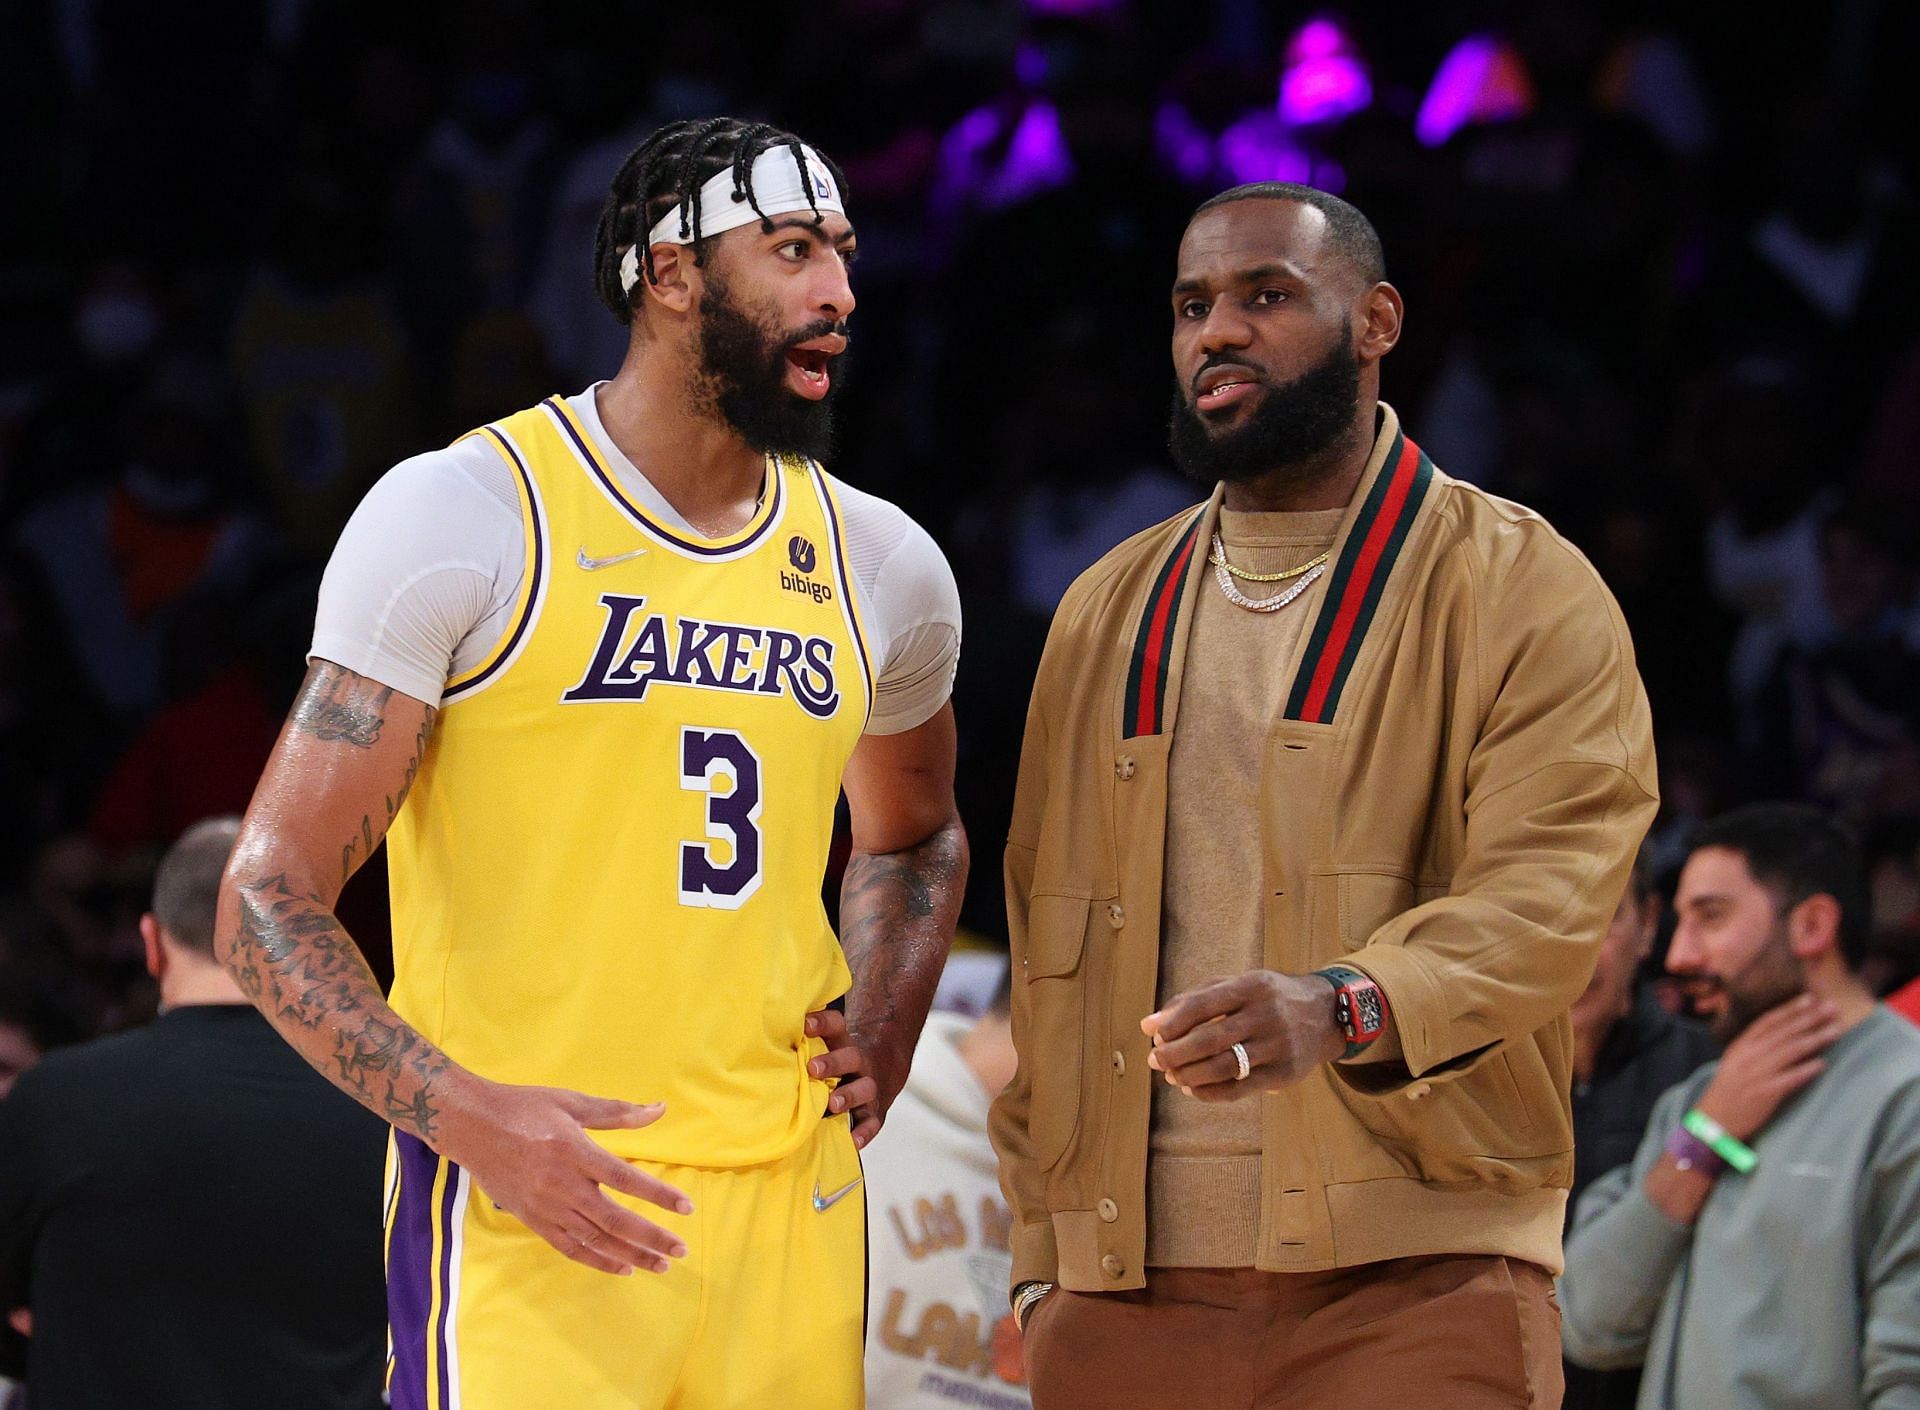 The LA Lakers lost yet another game as LeBron James sat out the contest against Chicago on Monday